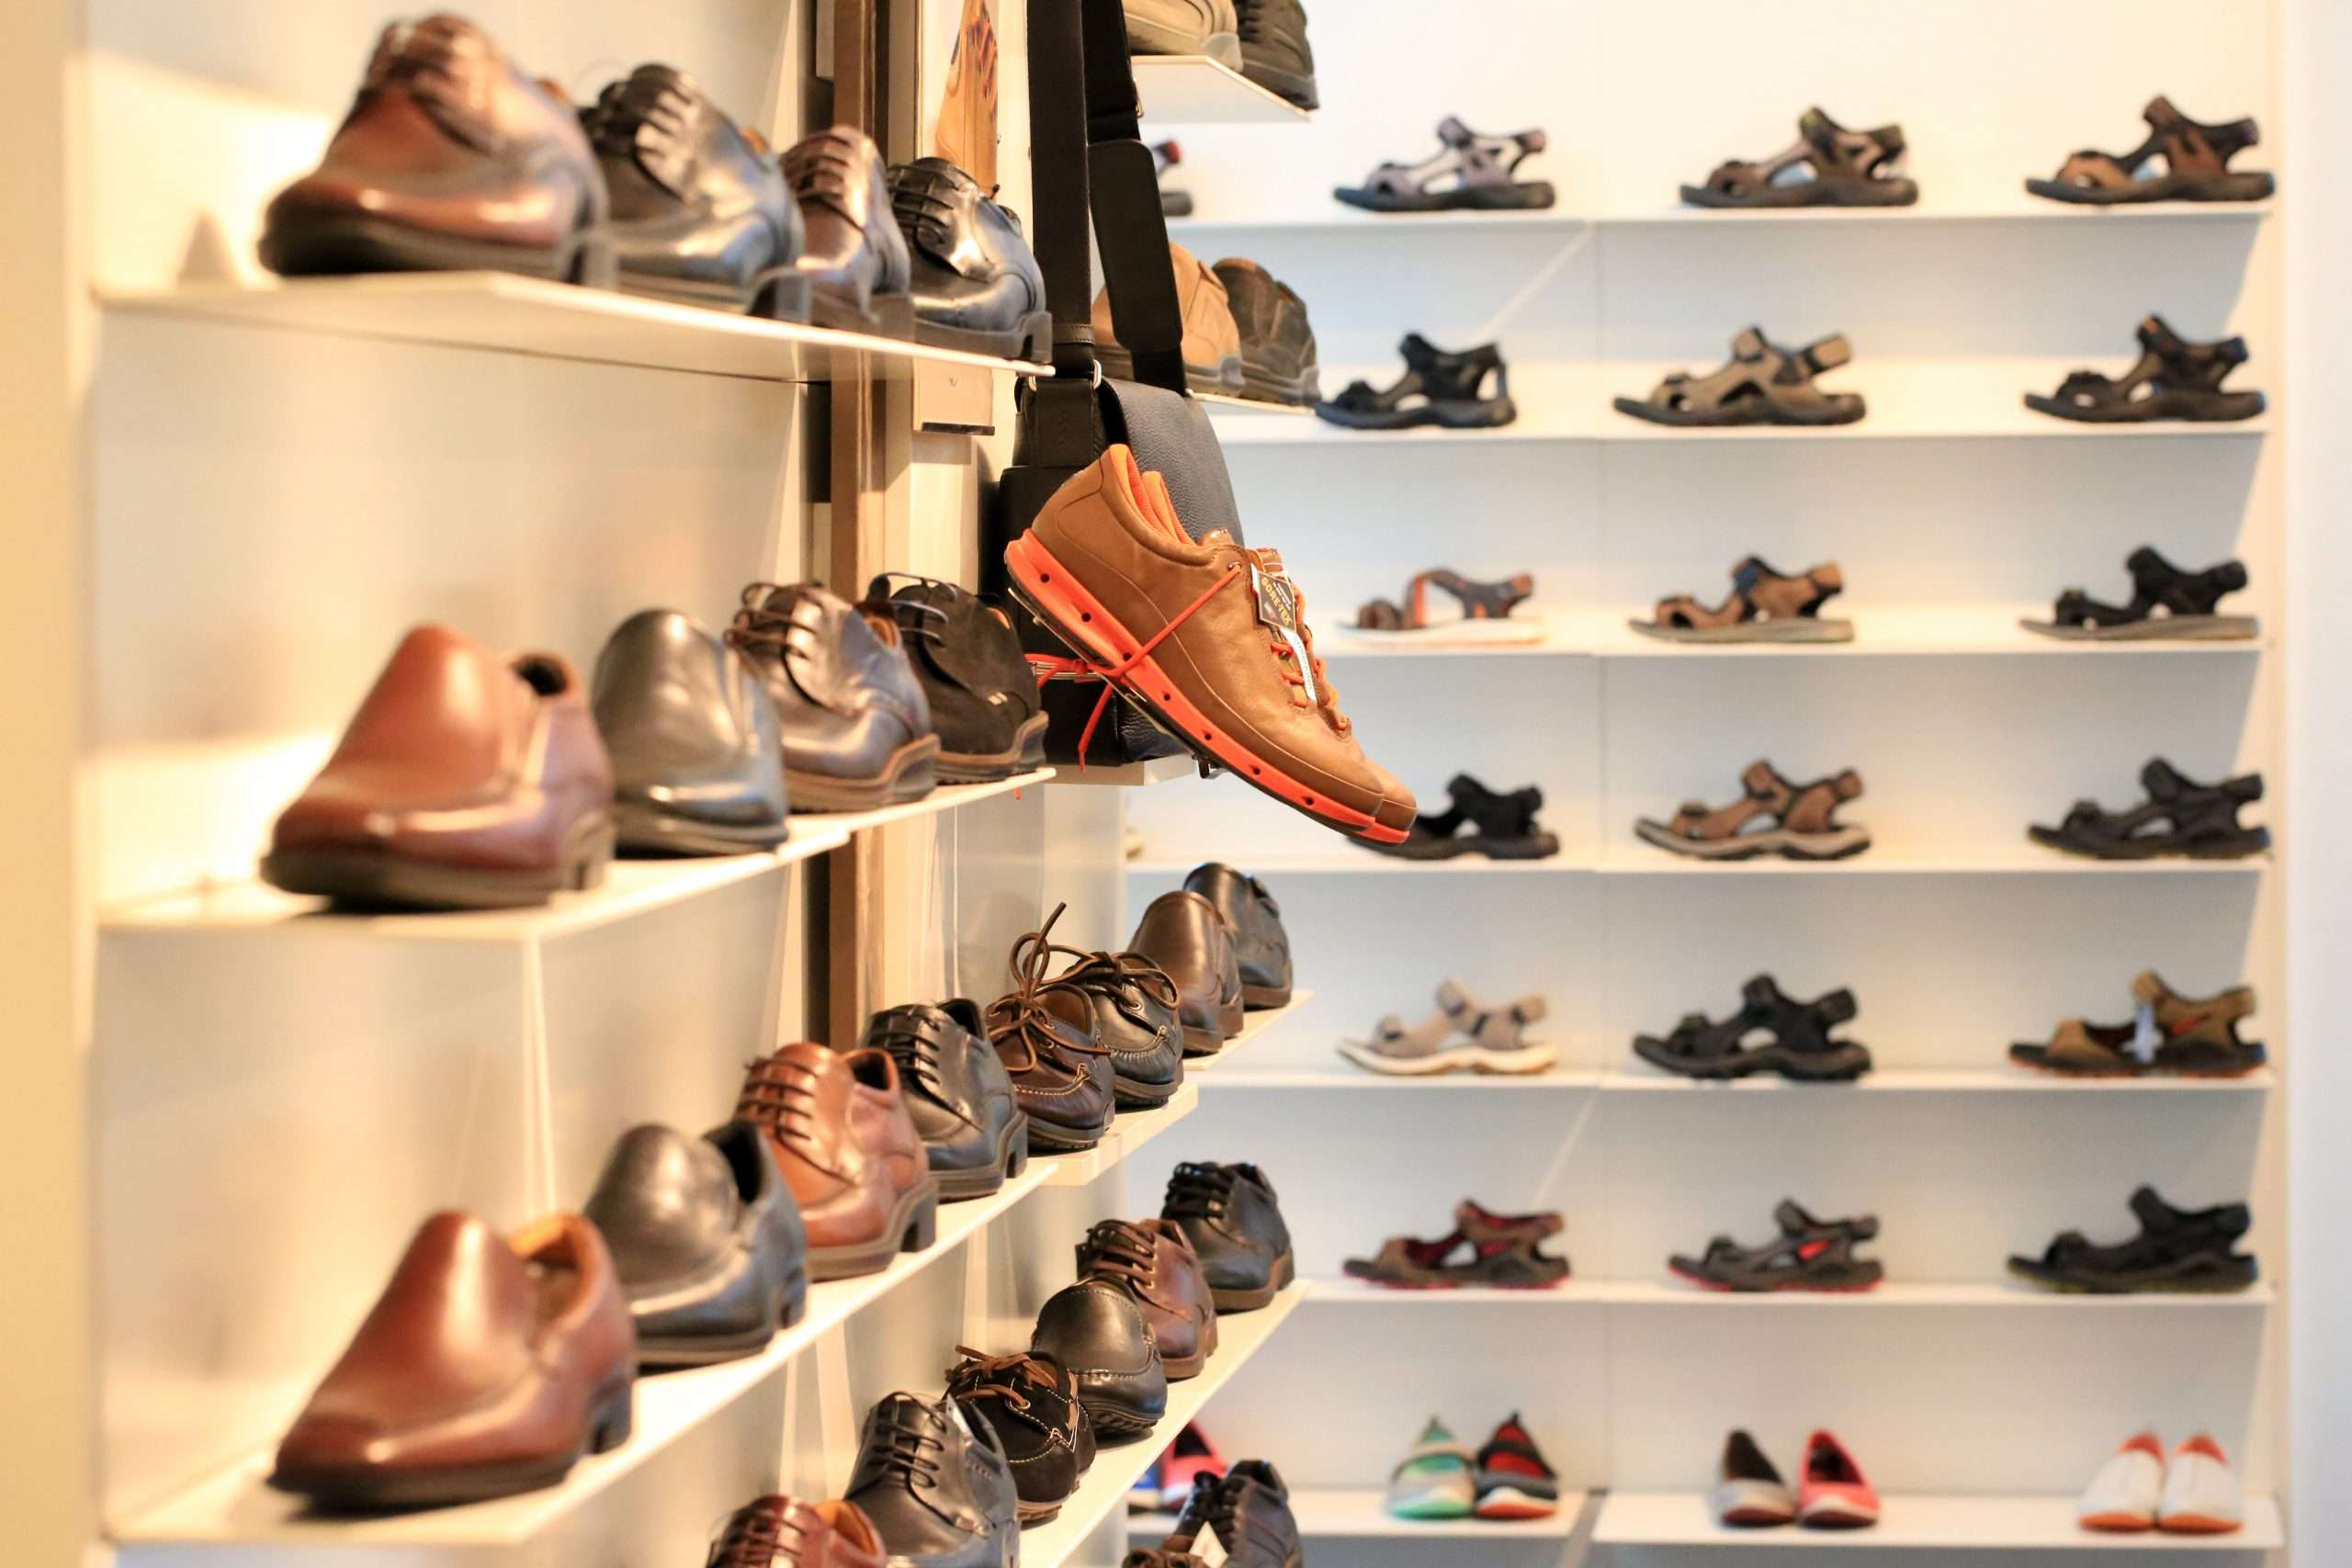 Shoes on the shelf at the shoe store image